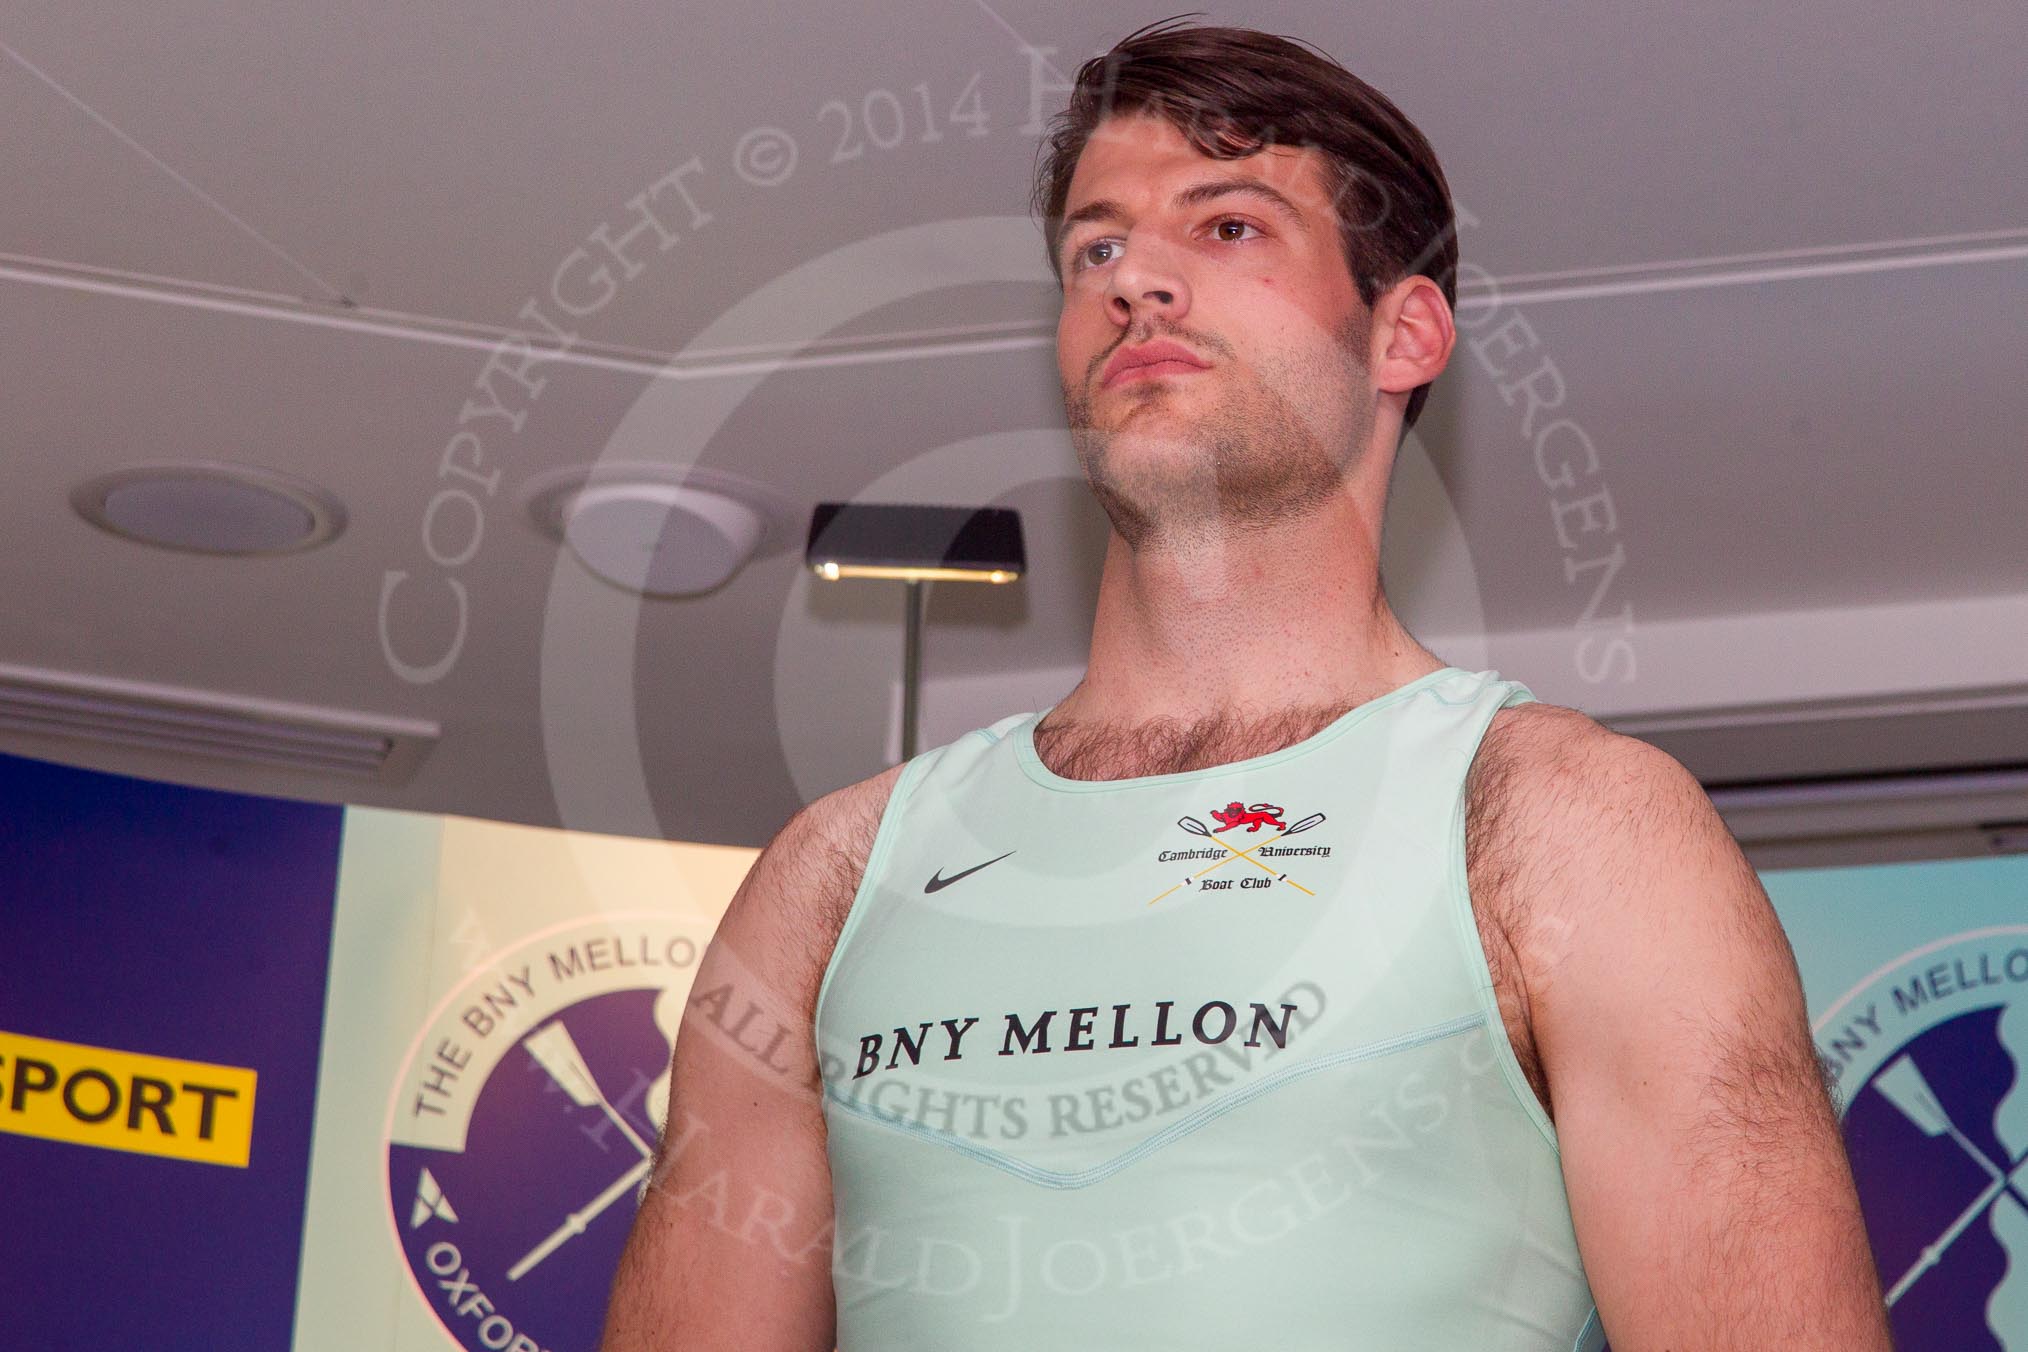 The Boat Race season 2014 - Crew Announcement and Weigh In: The 2014 Boat Race crews: Cambridge 4 seat Steve Dudek - 101kg..
BNY Mellon Centre,
London EC4V 4LA,
London,
United Kingdom,
on 10 March 2014 at 12:01, image #92